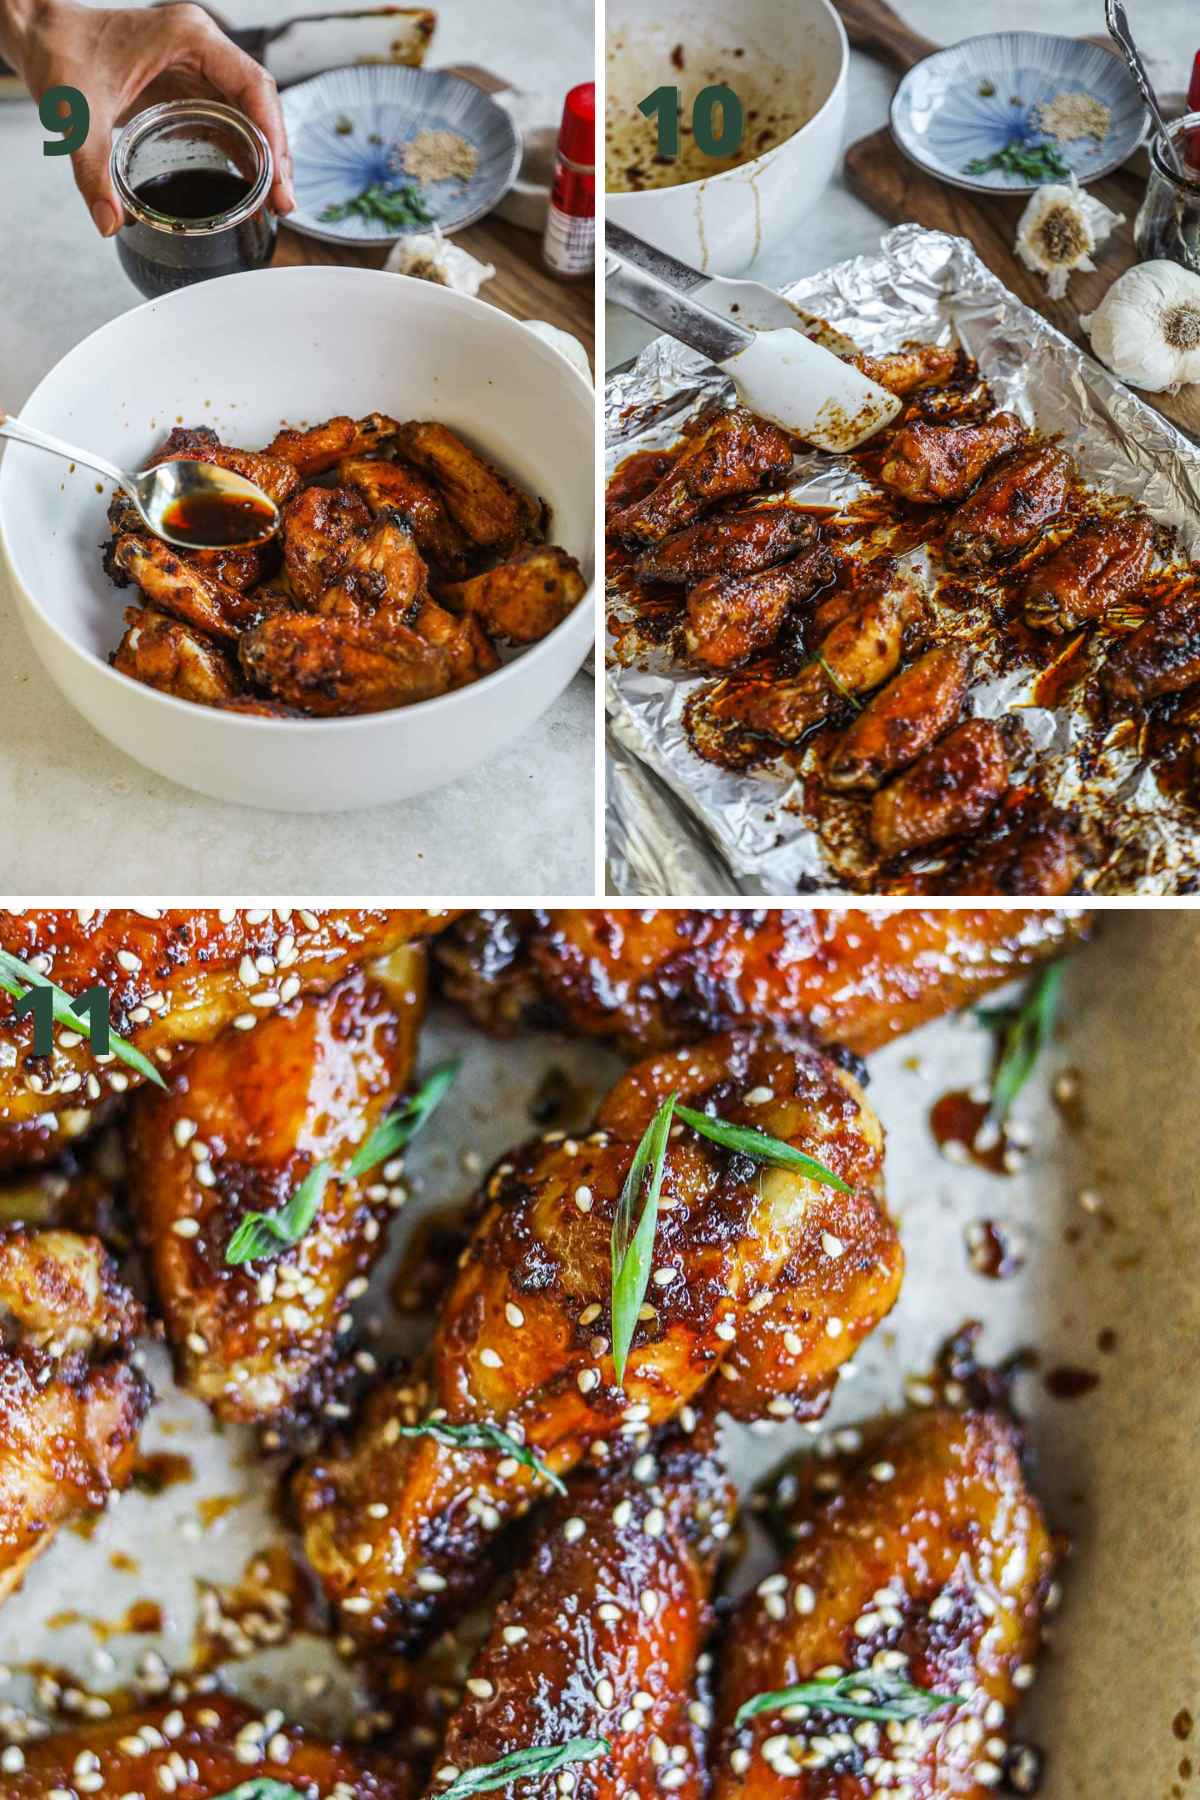 Steps to make honey soy garlic chicken wings, tossing wings in honey soy garlic sauce, baking to caramelize, and serving with green onions and sesame seeds.